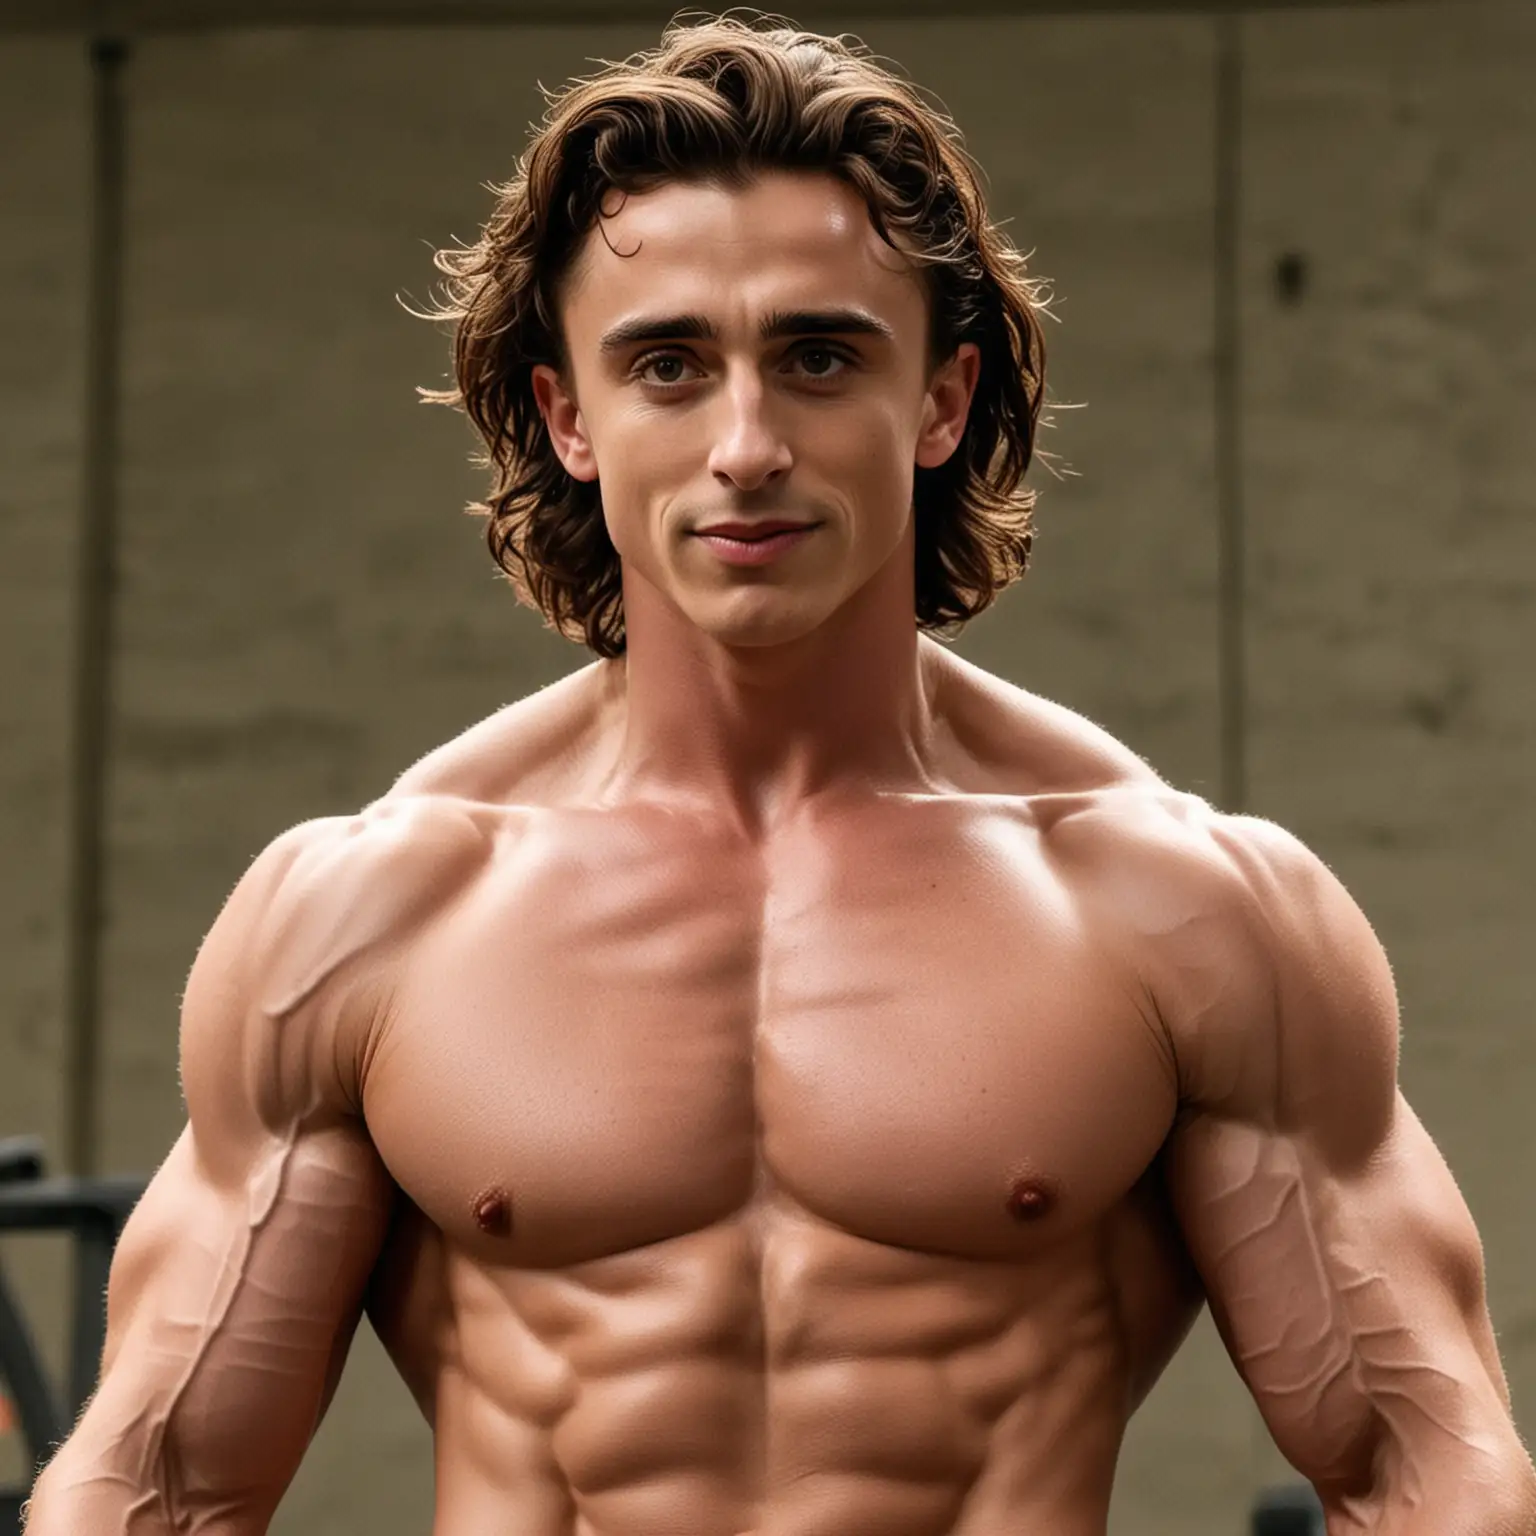 Timothee Chalamet with huge muscles like Arnold Schwarzenegger in a body building competition
